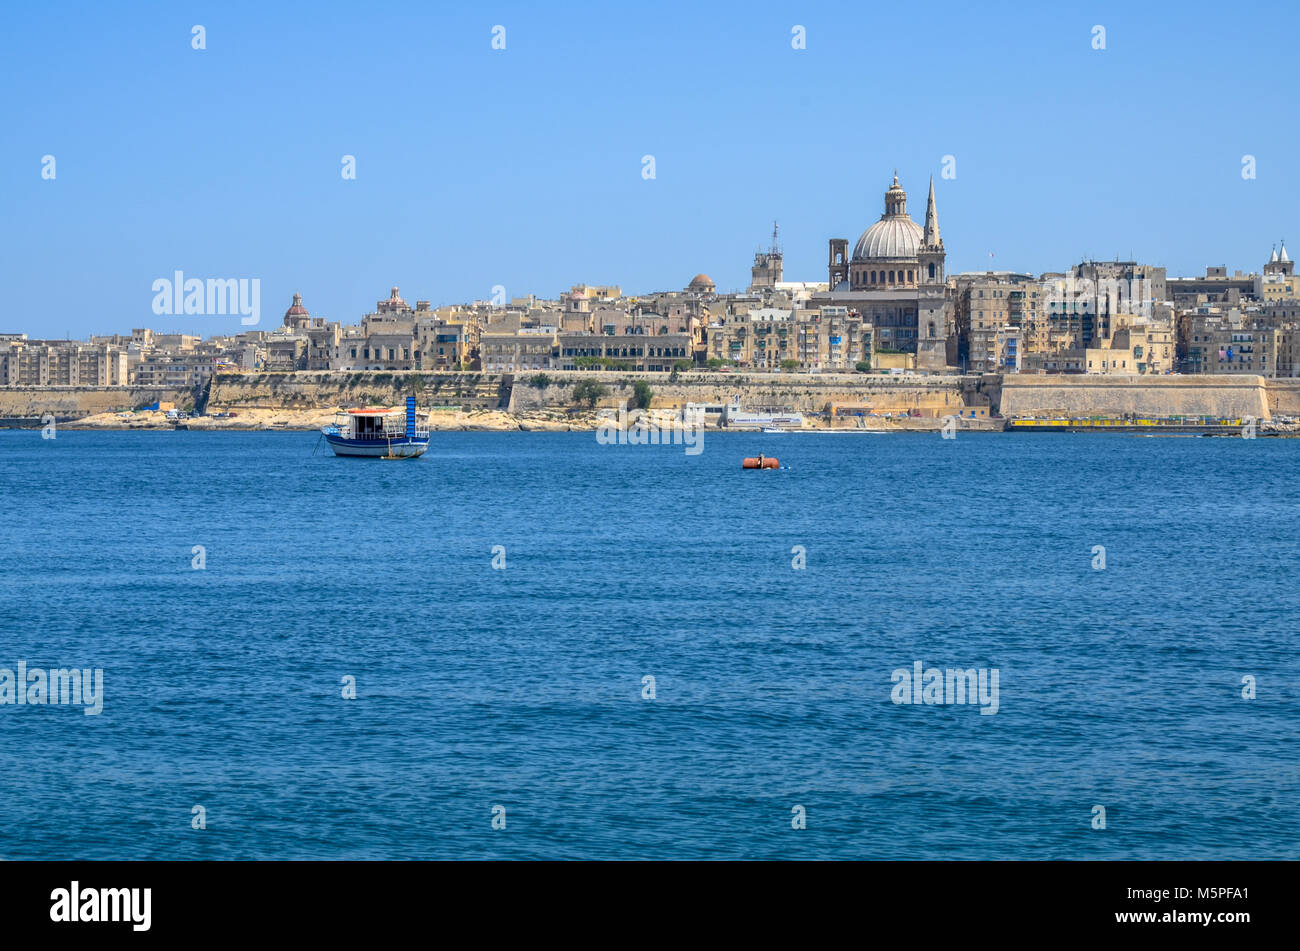 View of Valletta from Sliema, with the prominent dome of the Basilica of Our Lady of Mount Carmel, Valletta - Malta Stock Photo